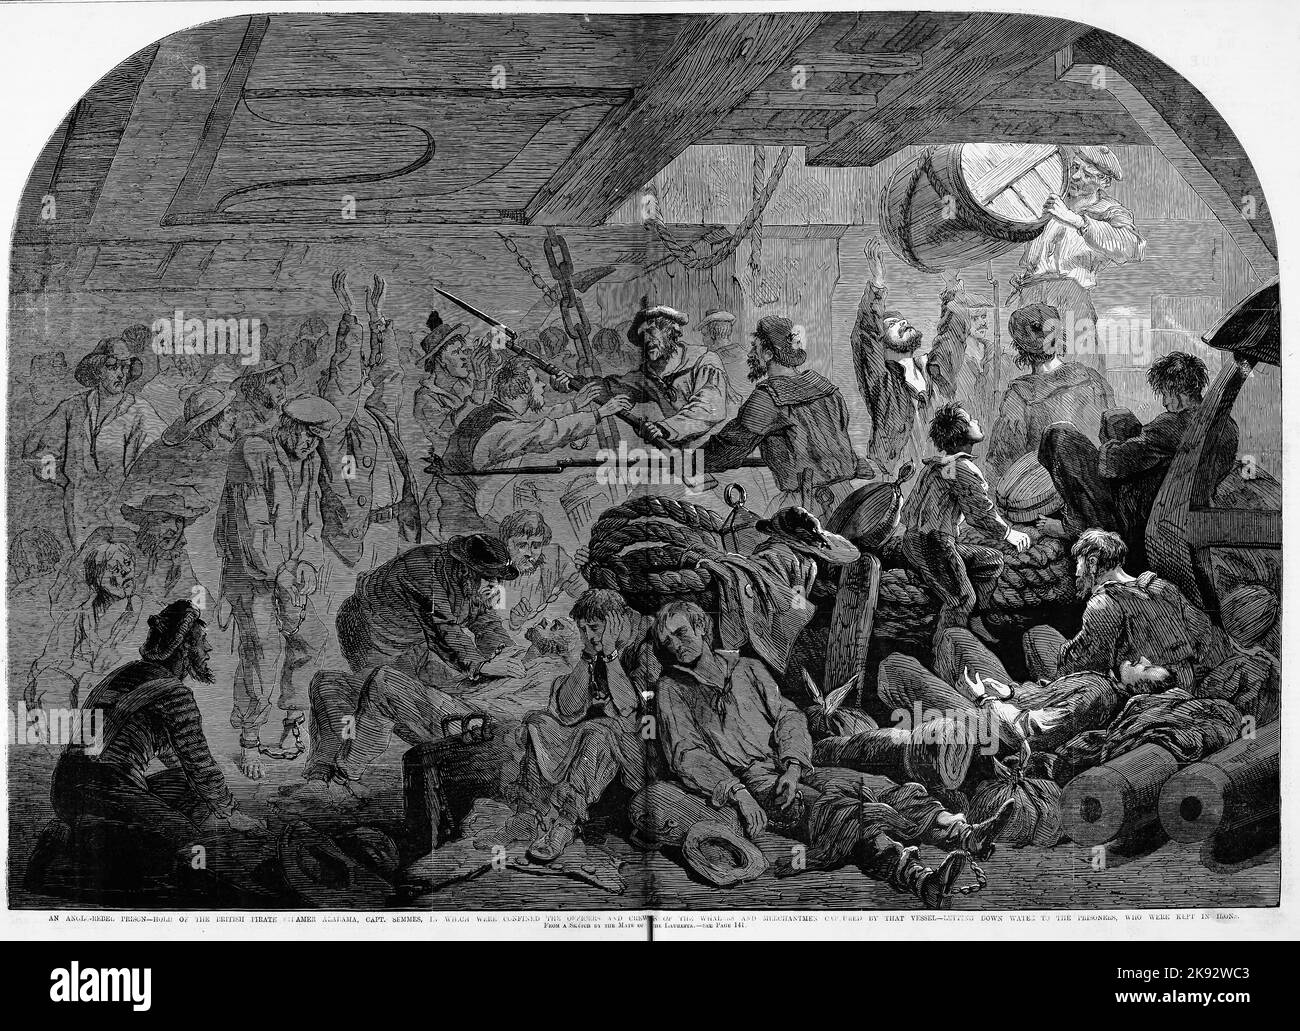 An Anglo-Rebel Prison - Hold of the British pirate steamer Alabama, Captain Raphael Semmes, in which were confined the officers and crews of the whalers and merchantmen captured by that vessel - Letting down water to the prisoners, who were kept in irons. October 1862. 19th century American Civil War illustration from Frank Leslie's Illustrated Newspaper Stock Photo